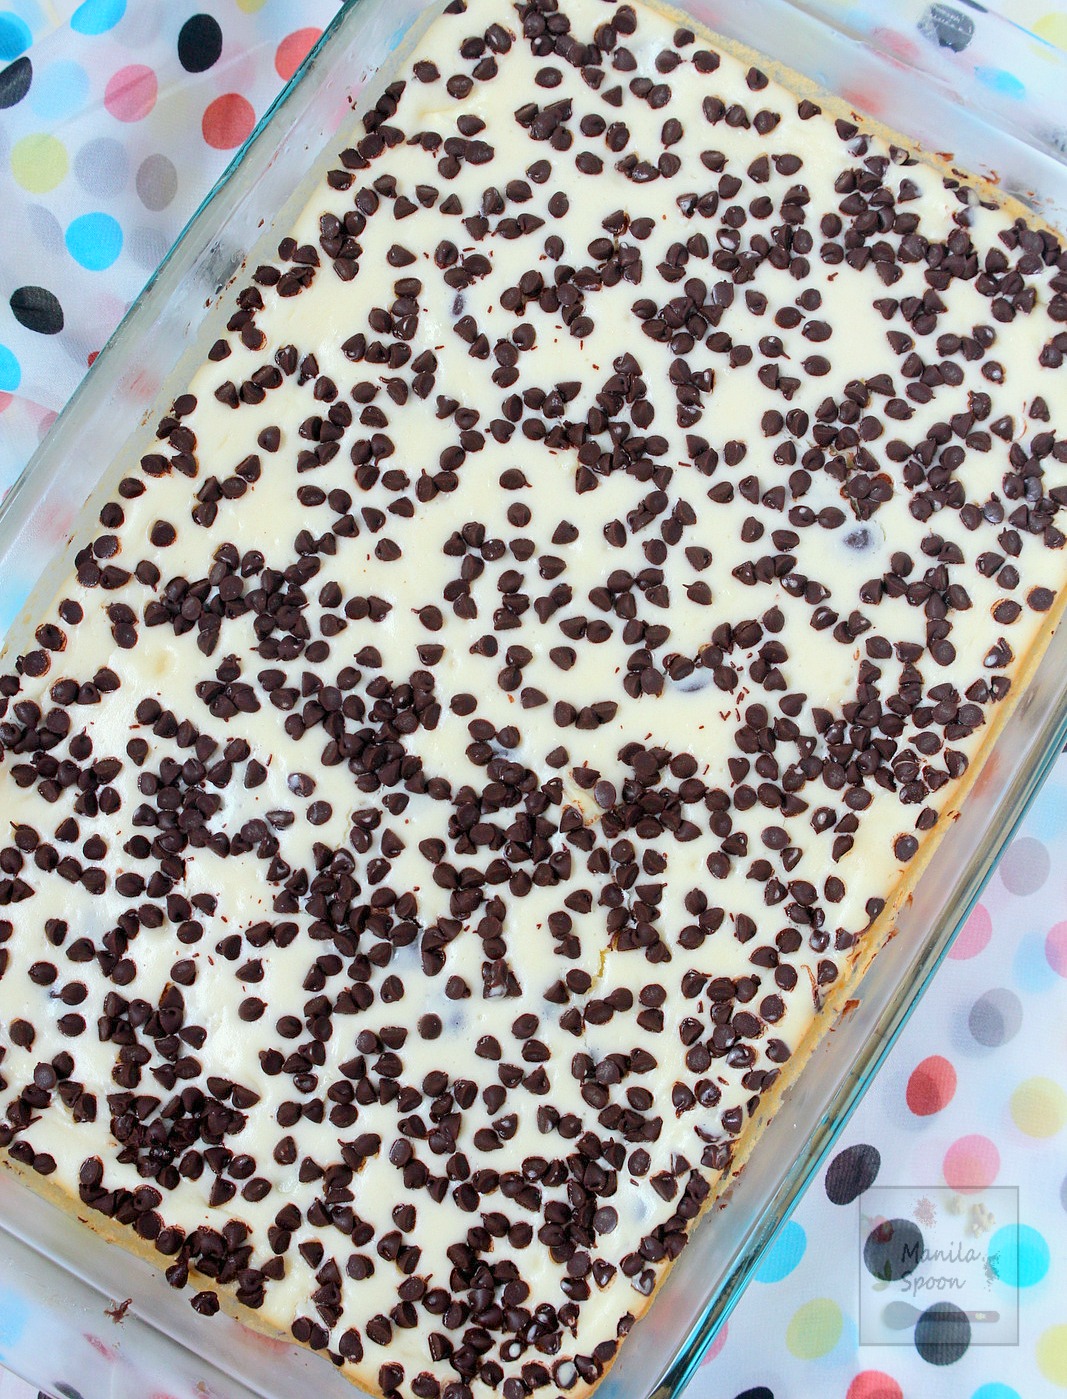 Craving chocolate and cheesecake? These delicious choco chip cheesecake bars are the solution! Easy recipe that you will make again and again. | manilaspoon.com